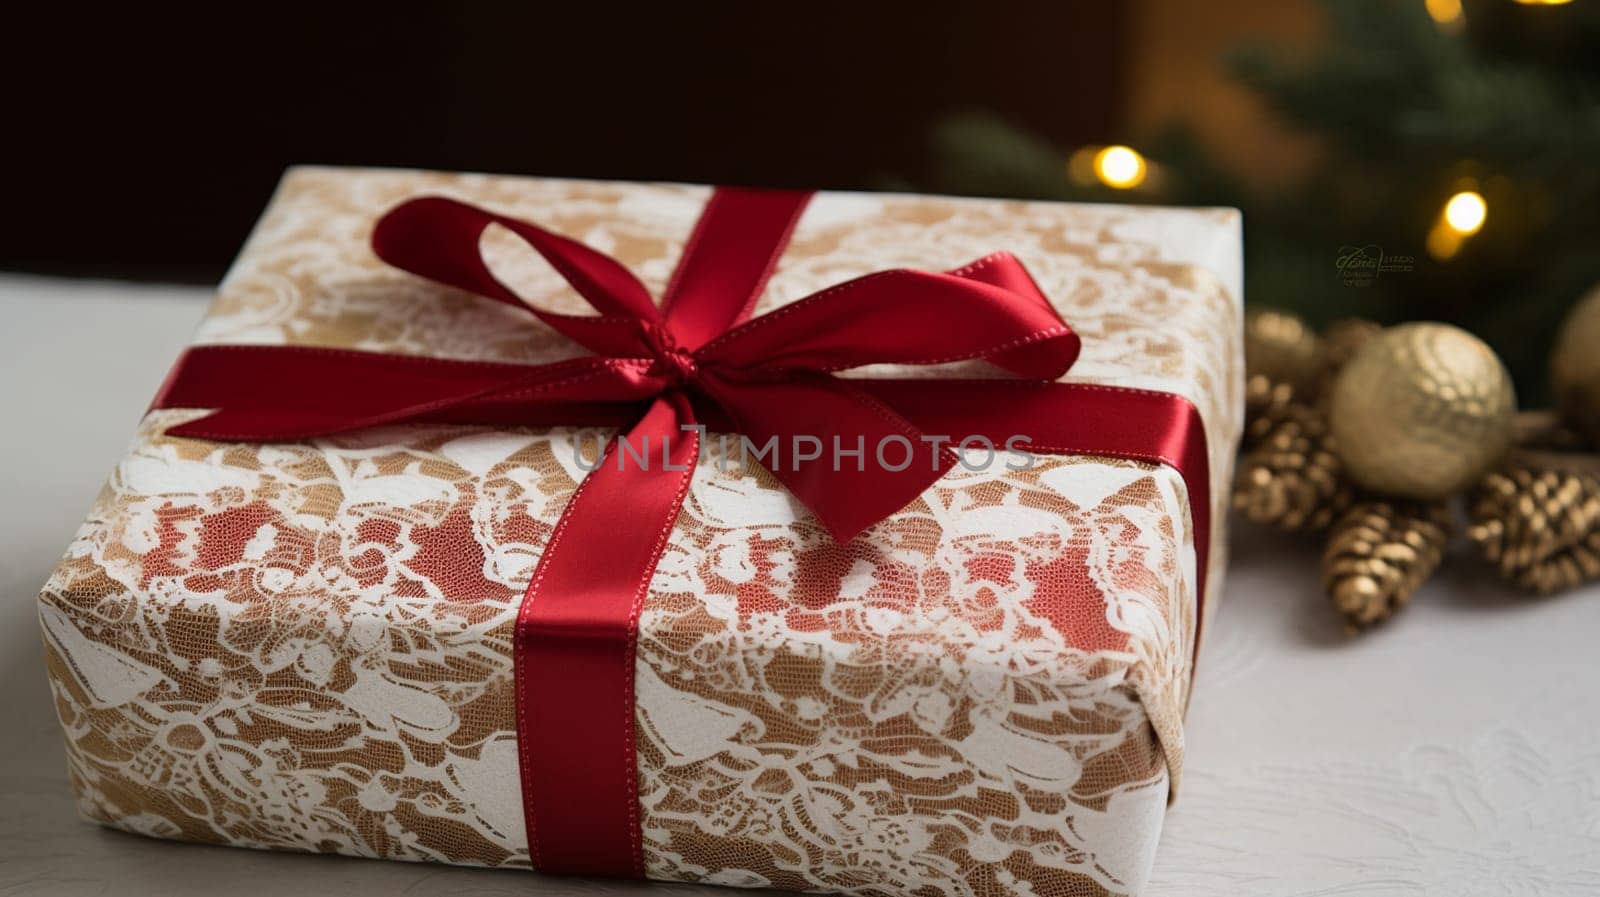 Christmas gift box wrapping idea for boxing day and winter holidays in the English countryside tradition